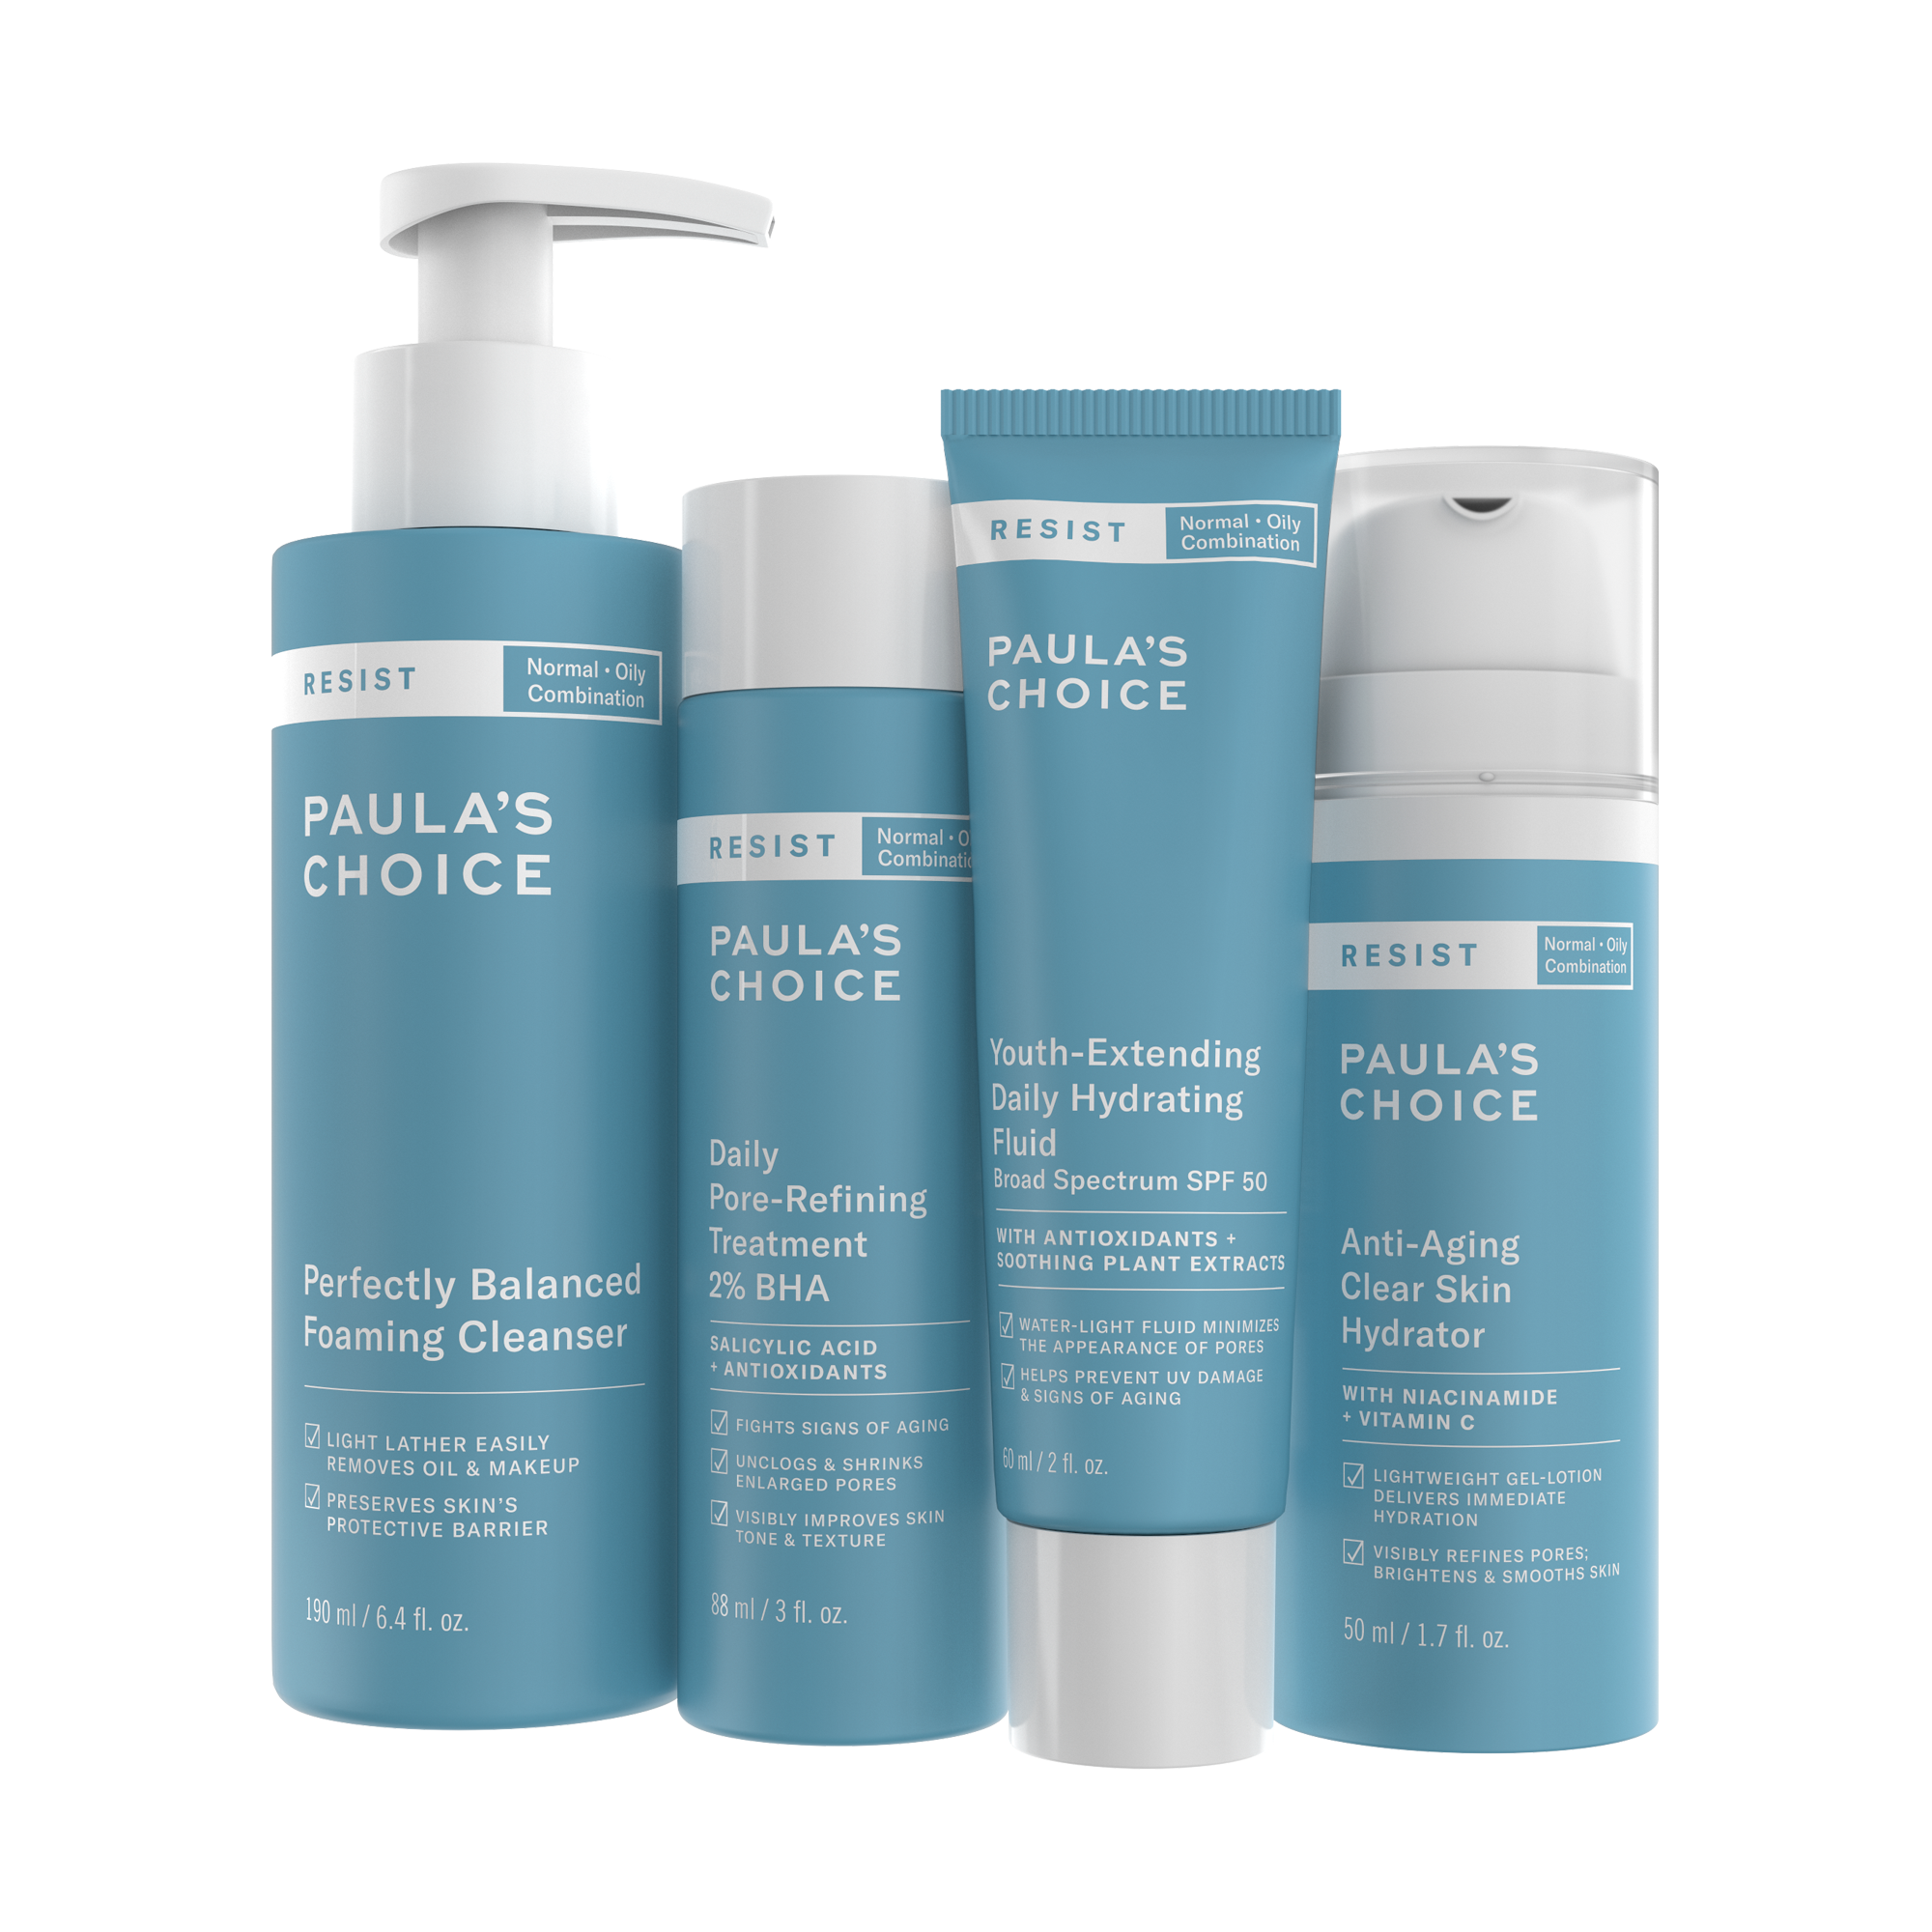 RESIST Essential Kit For Normal To Oily Skin | Paula's Choice